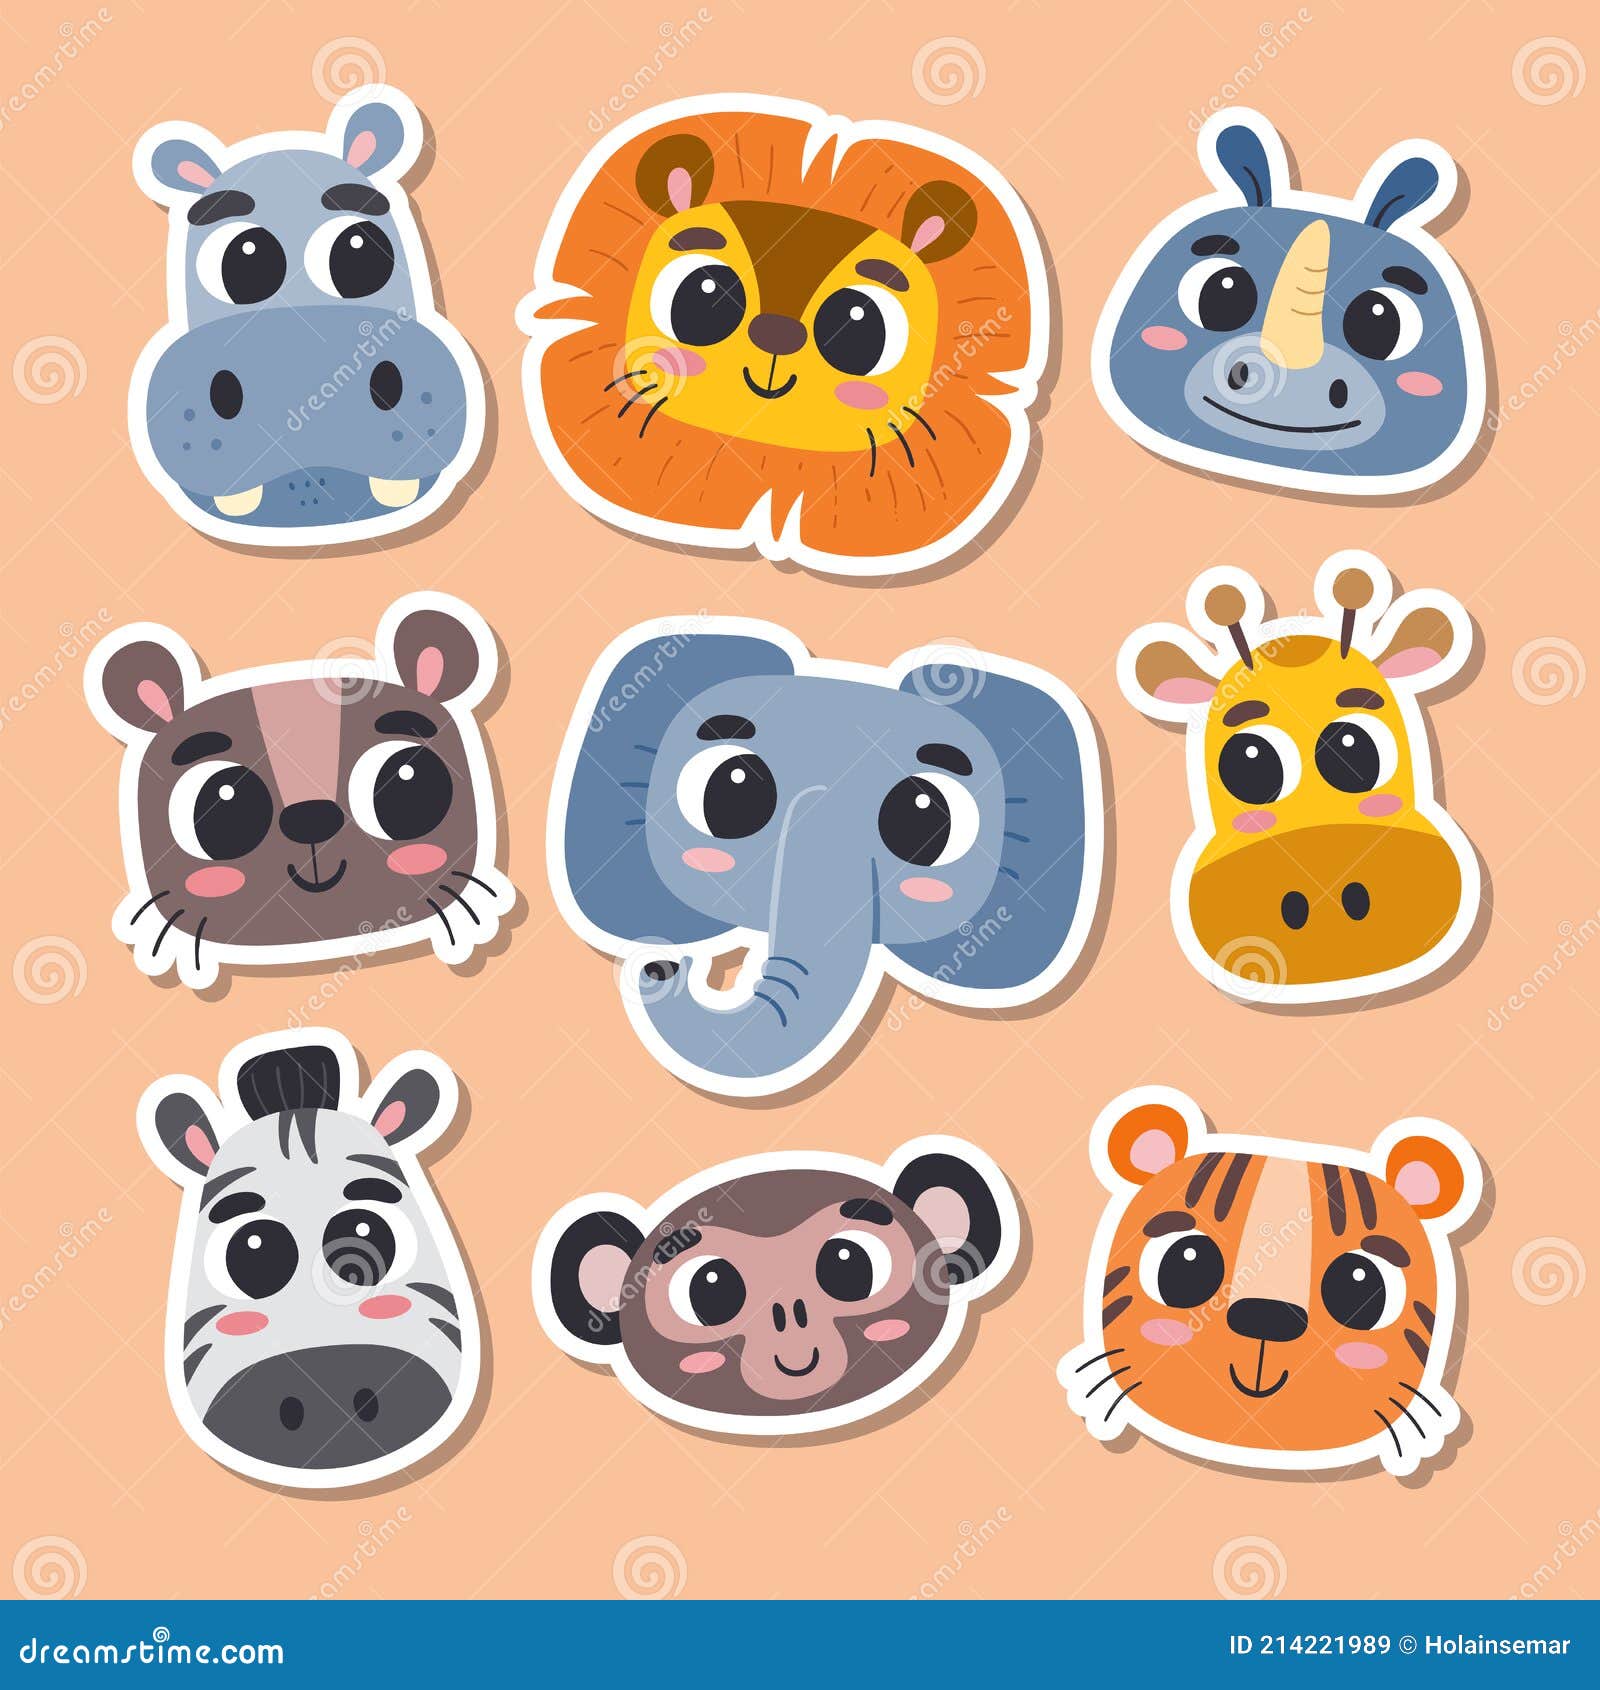 Cute Jungle Animals Sticker Collection Stock Vector - Illustration of  adorable, icon: 214221989